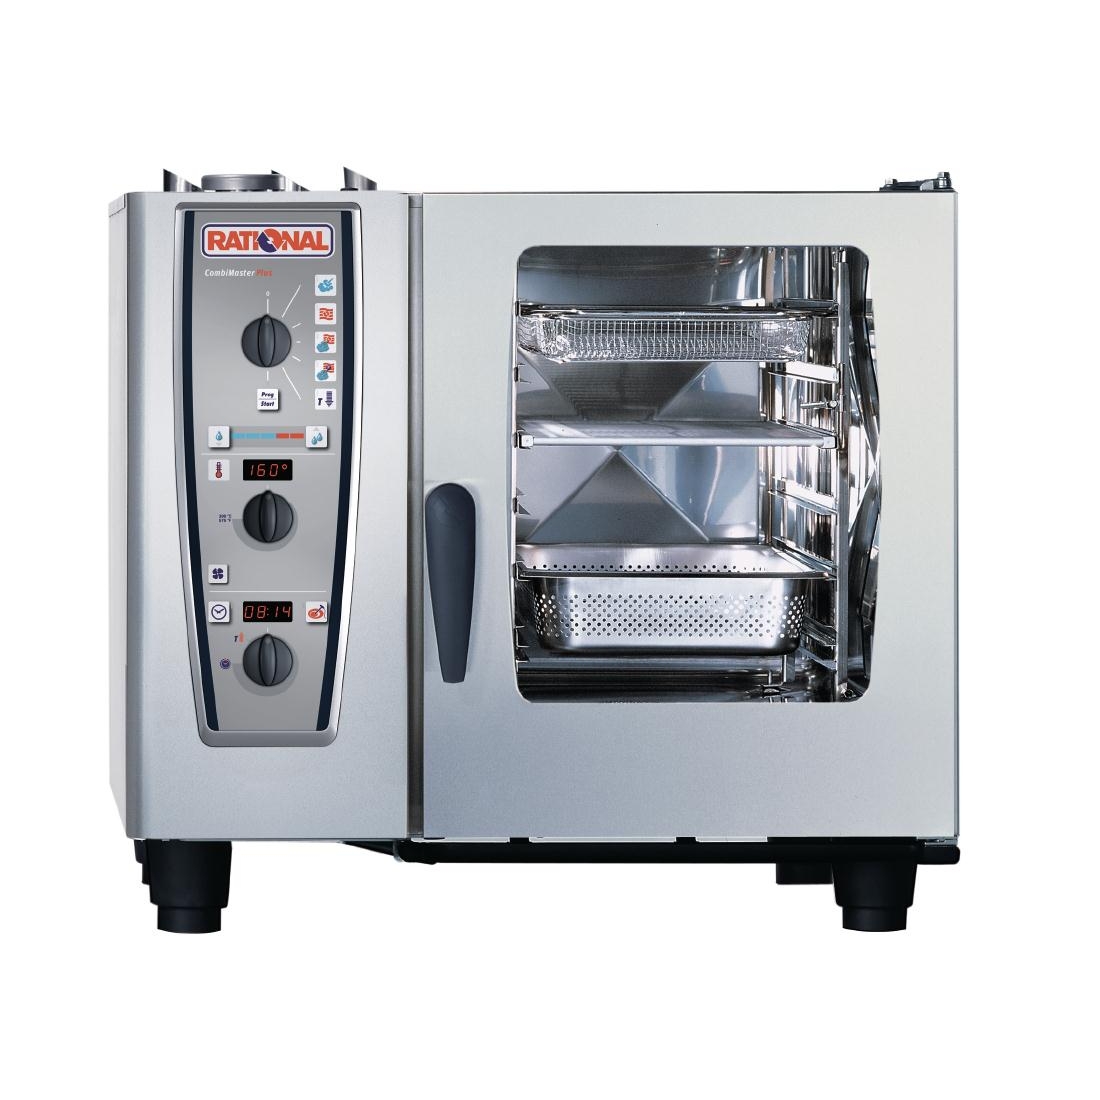 Rational Combimaster Plus Oven 61 Natural Gas